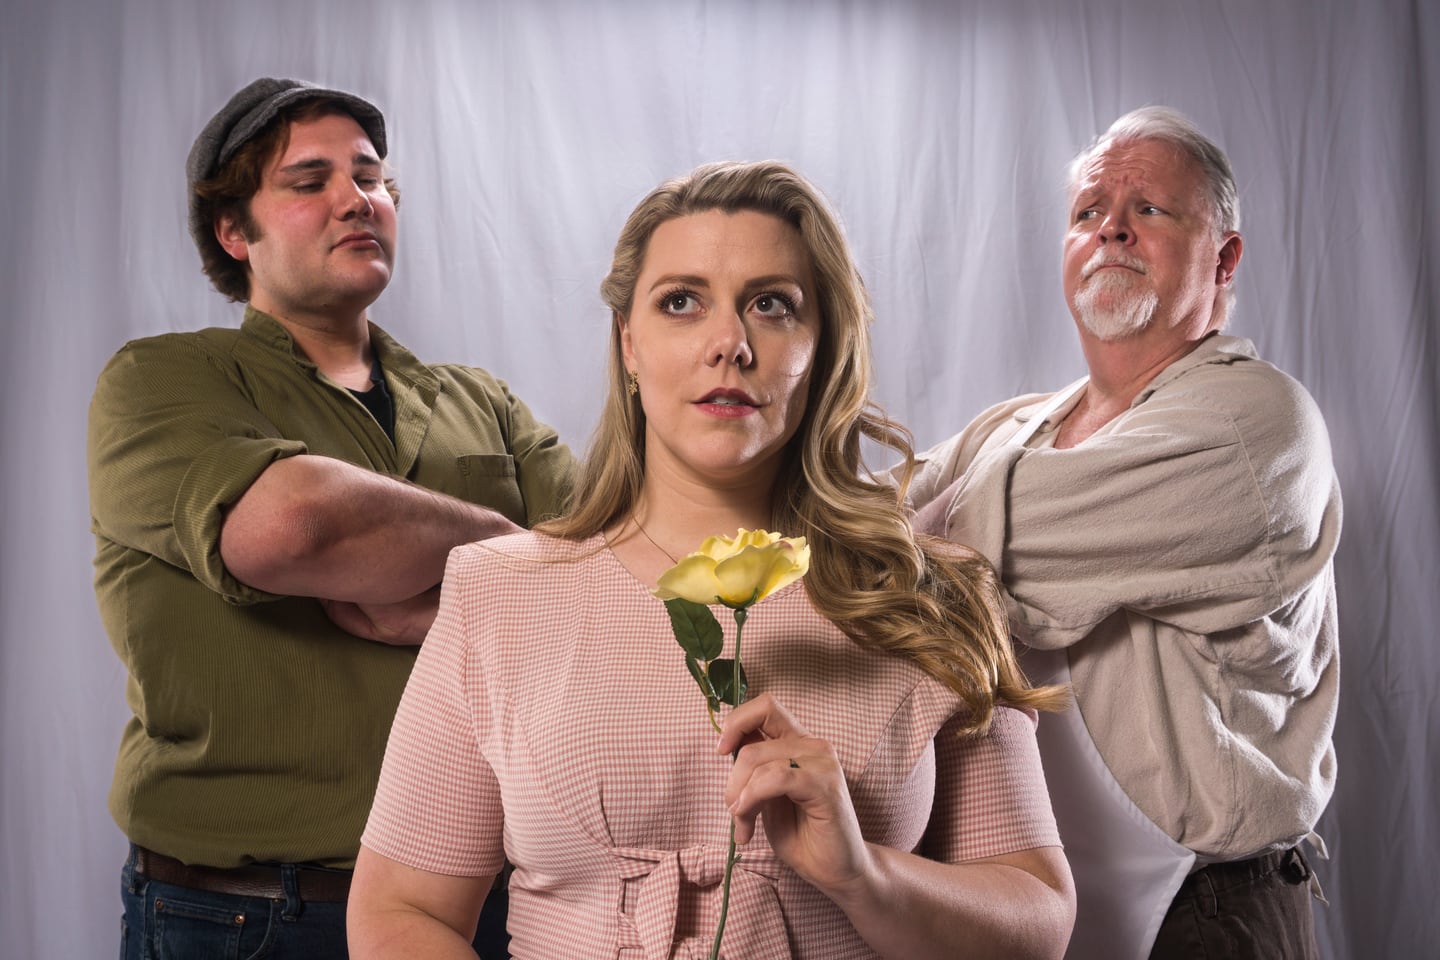 Colonial Players' production of "The Baker's Wife," stars Sydne Lyons as the wife, Kirk Patton Jr. as the gigolo who woos her and Steven Hoochuk as the baker who refuses to bake with a broken heart. The show runs through March 30.